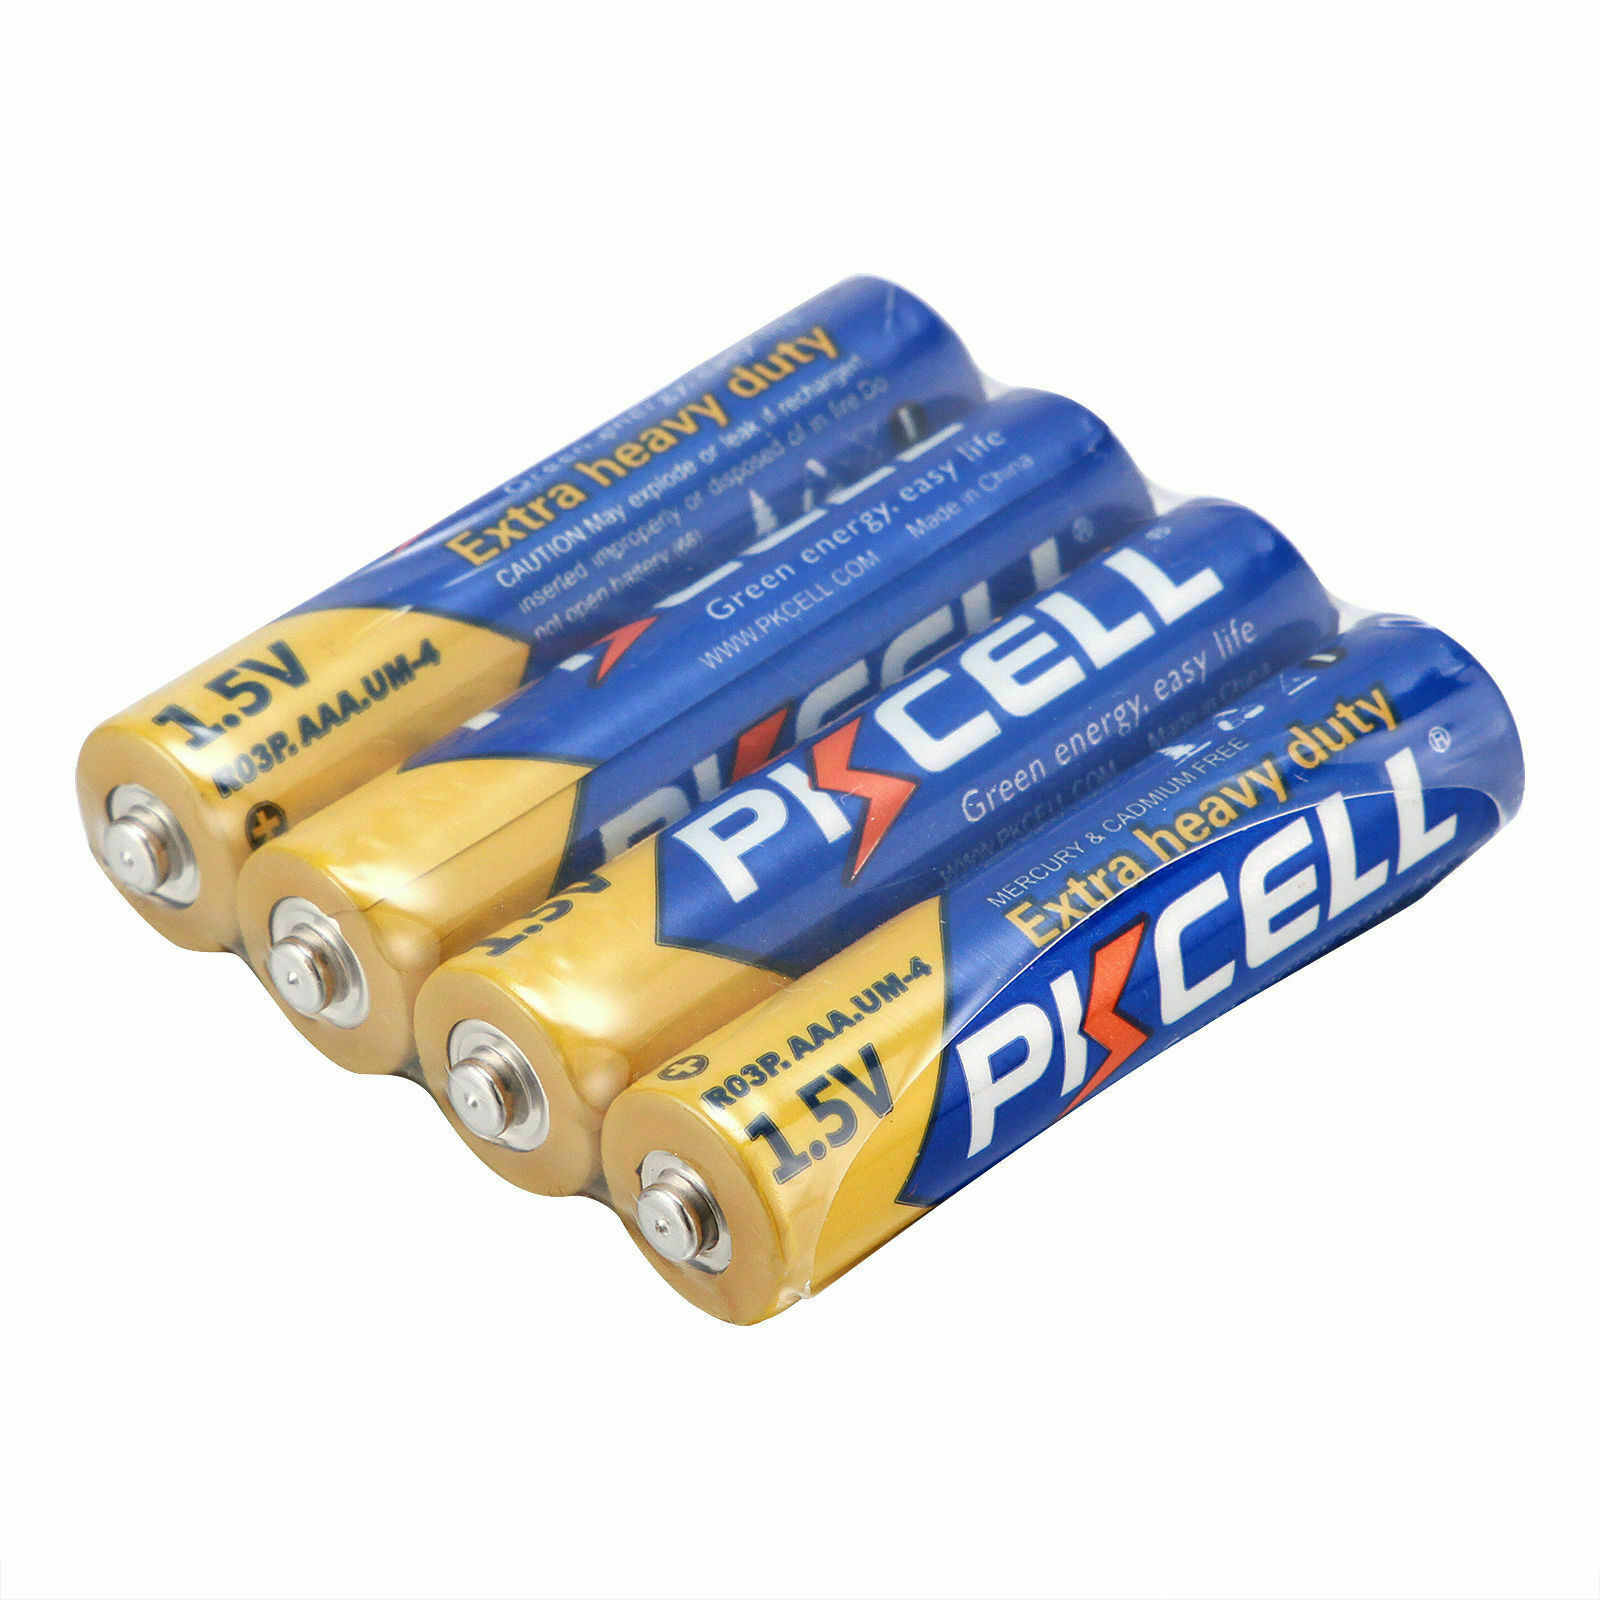 100x AAA Batteries R03P E92 PC2400 Triple A 1.5V Zinc-Carbon for Xmas Tree Light PKCELL Does Not Apply - фотография #5